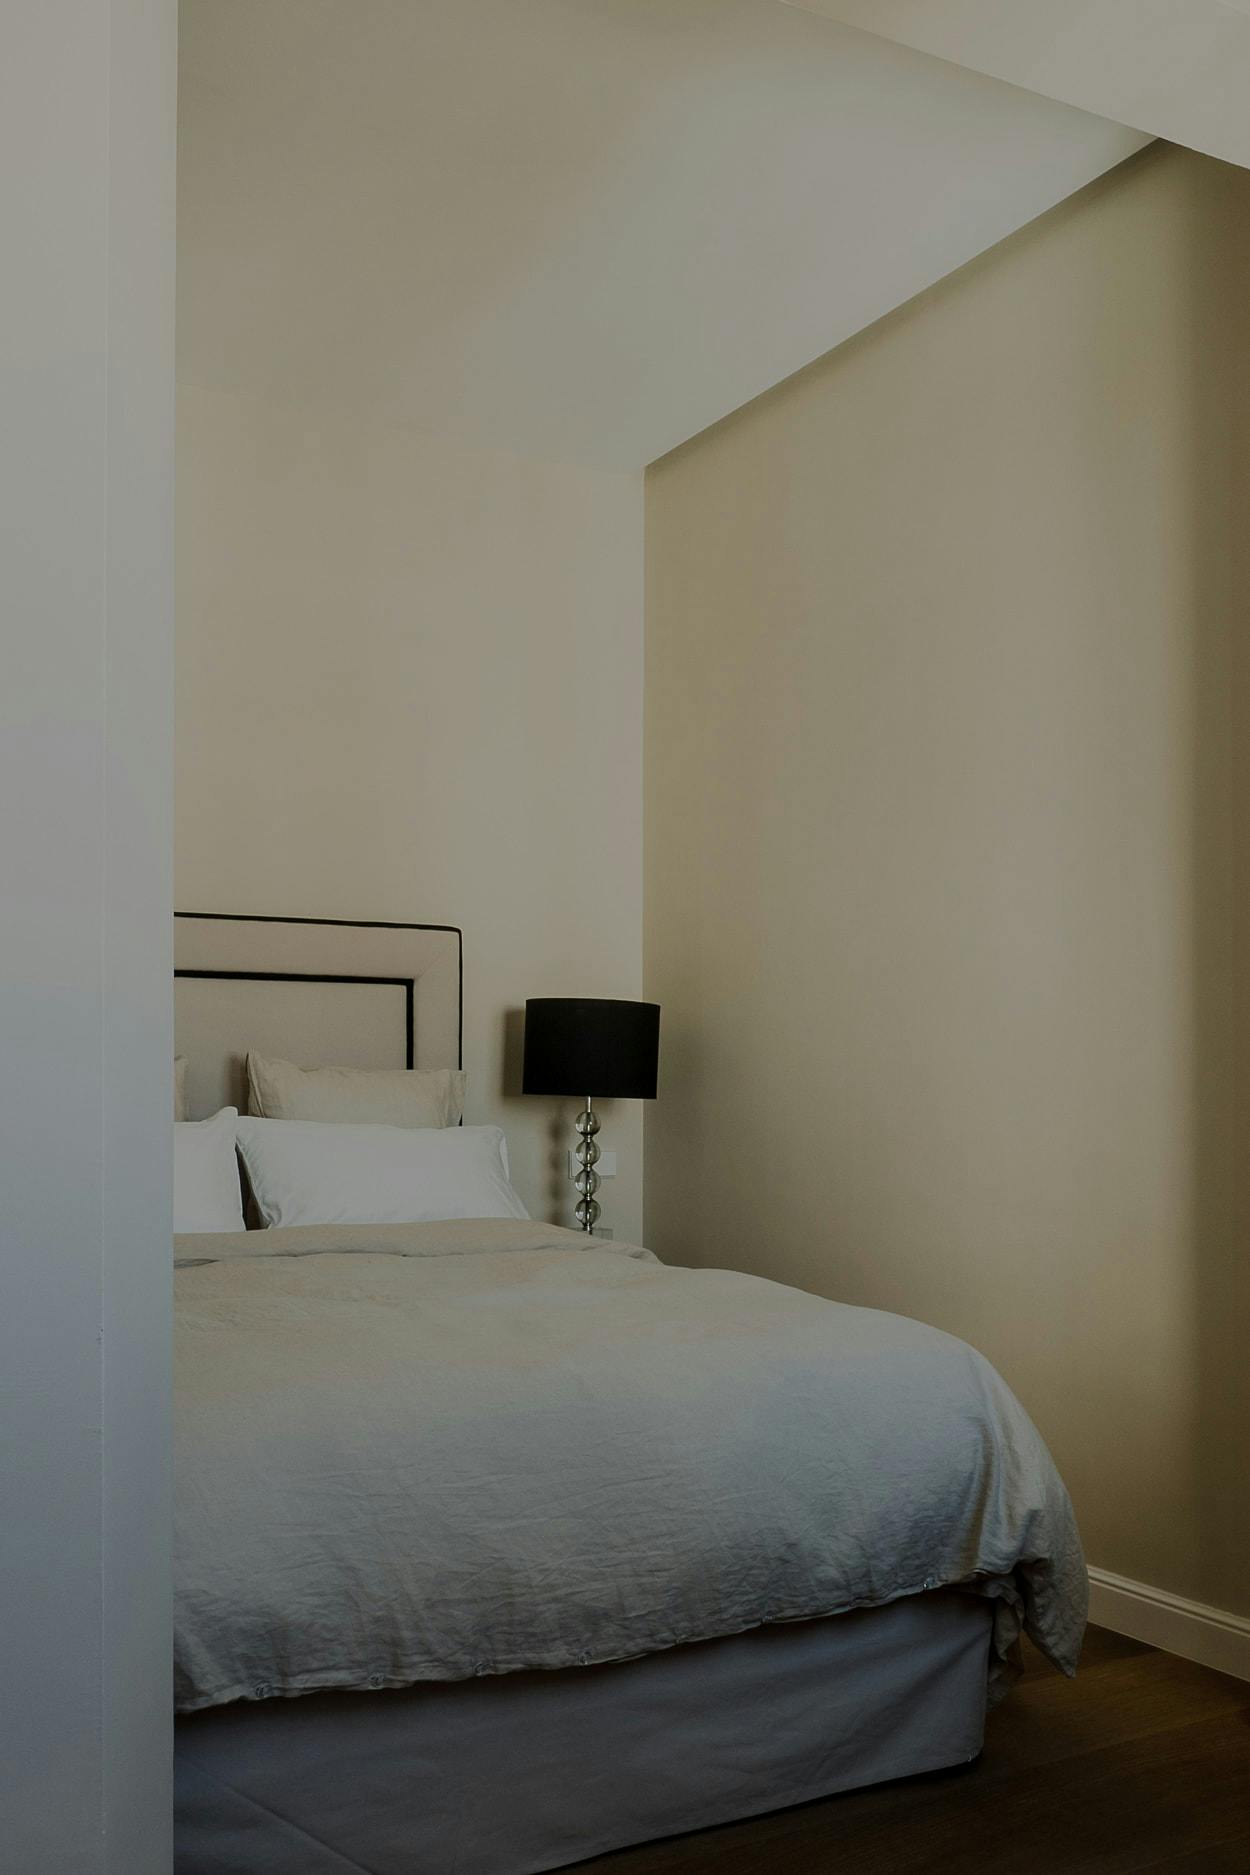 The image features a neatly made bed with a white comforter and pillows, placed next to a wall.